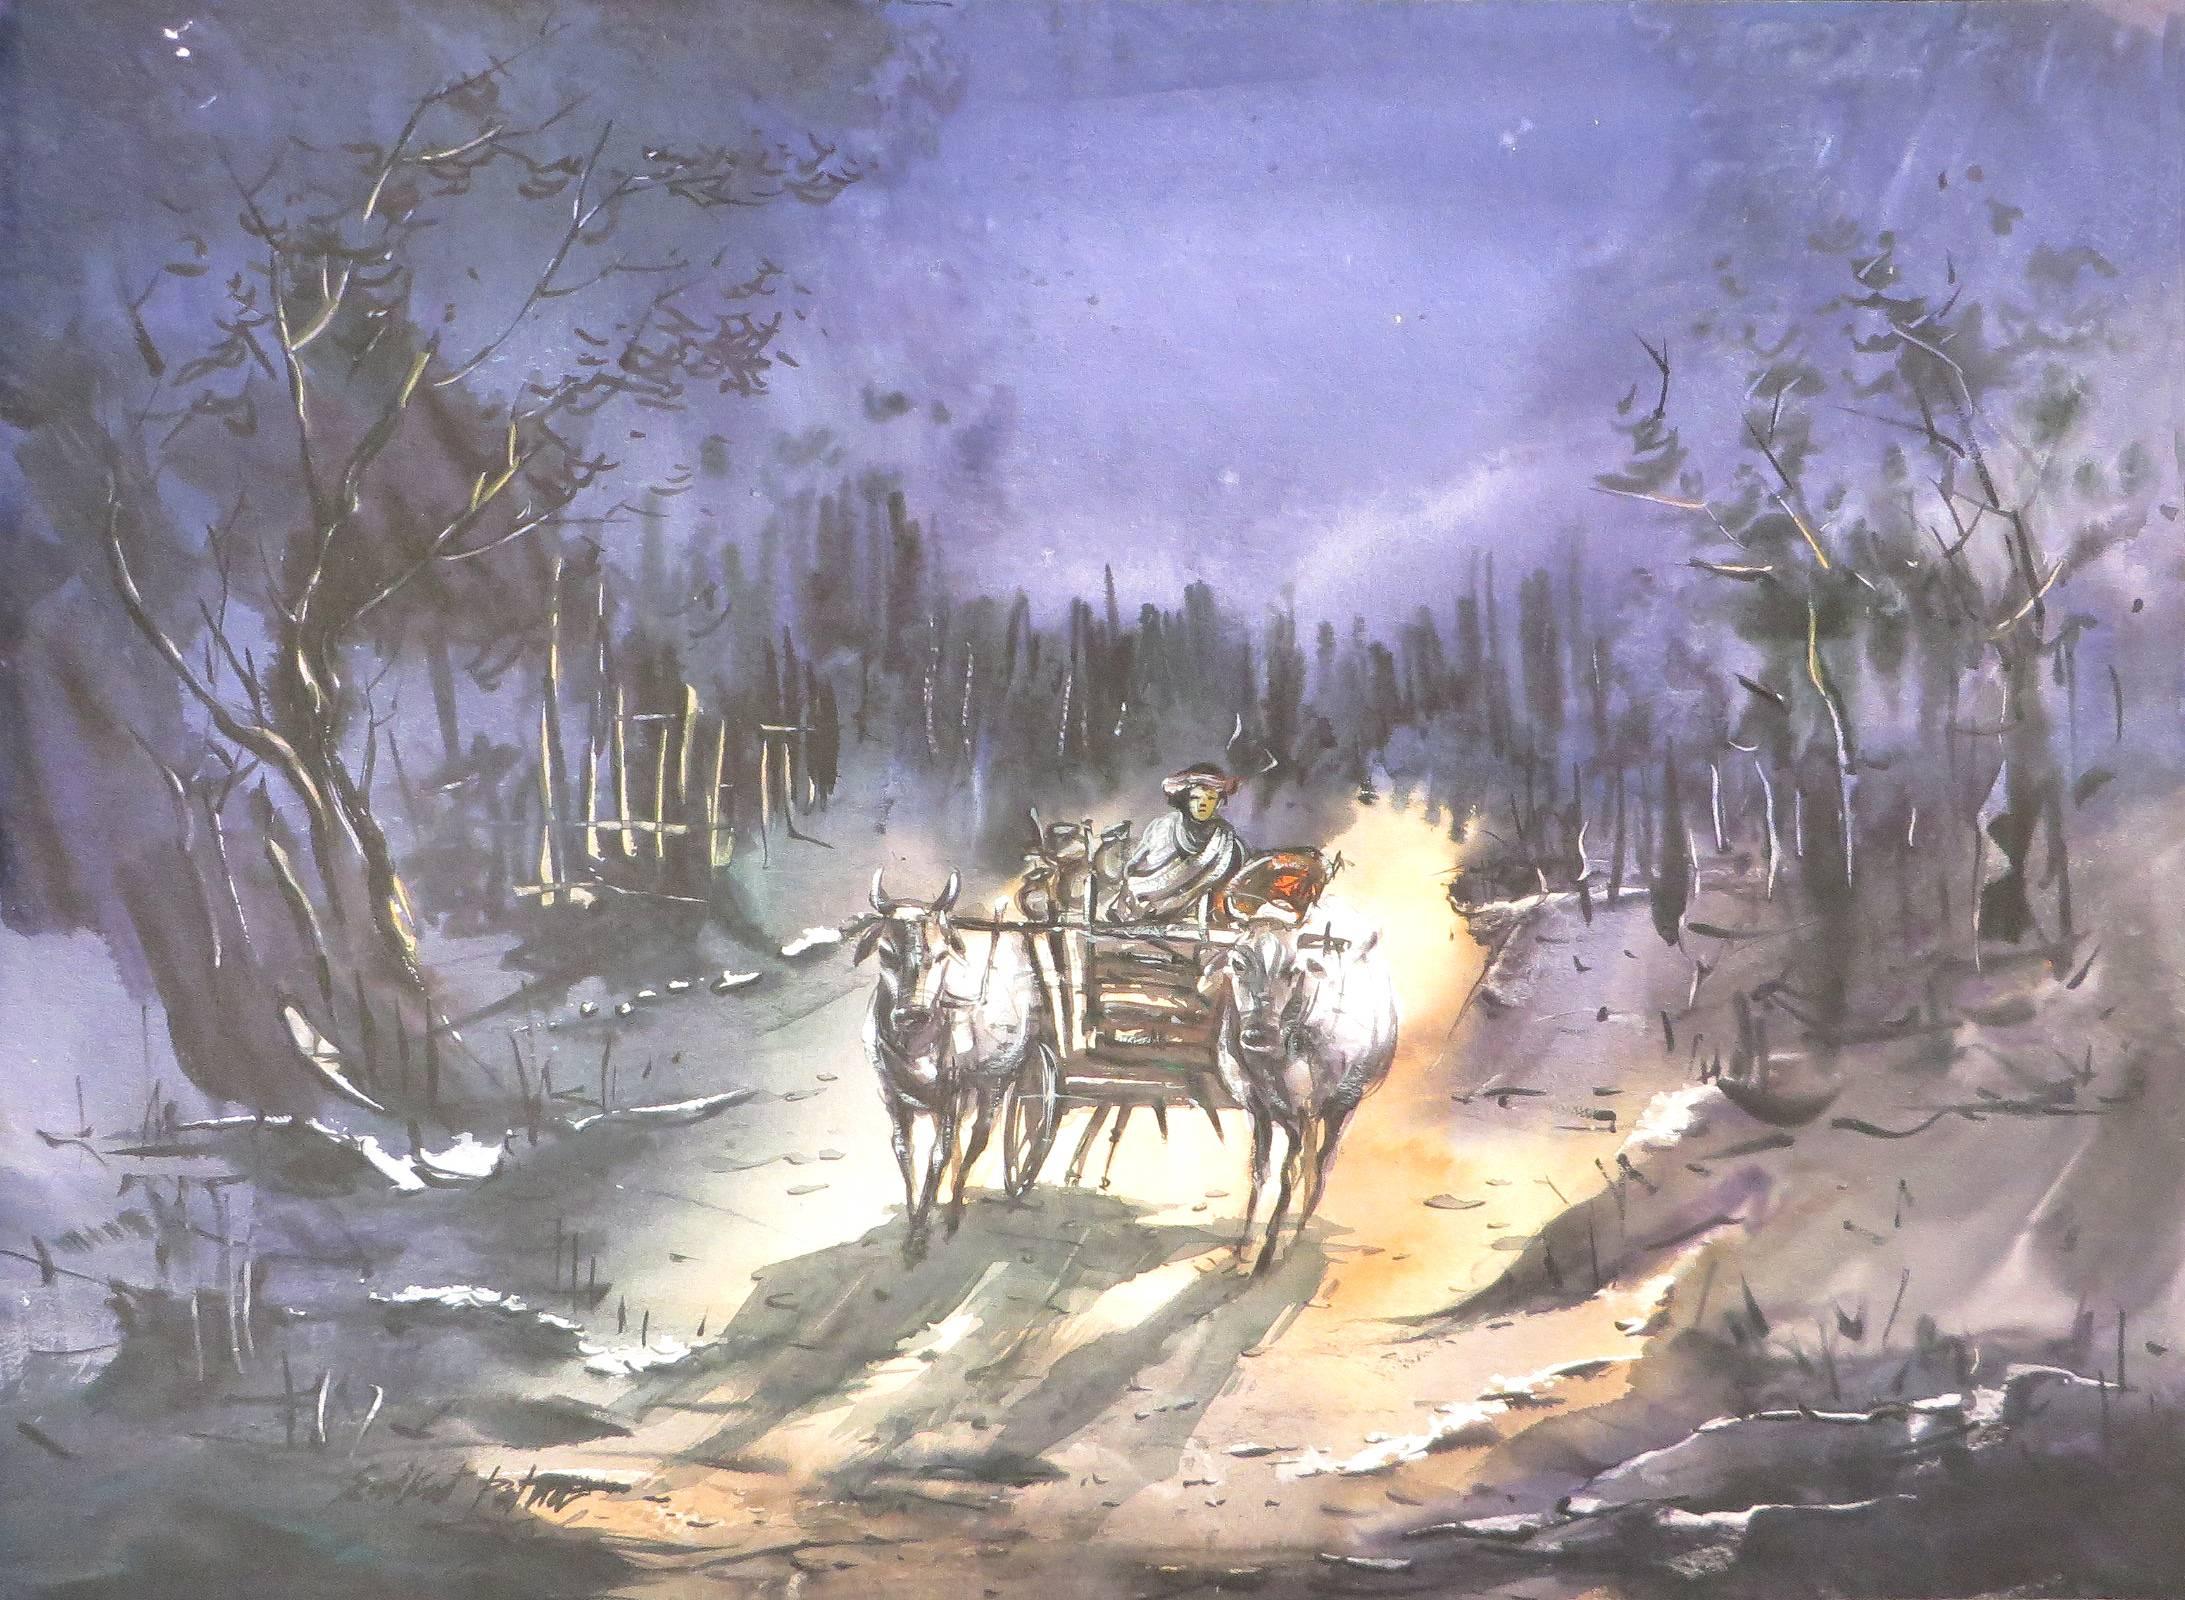 Village Scene at Night, Cow Cart, Watercolor on Paper, Violet, Brown "In Stock"